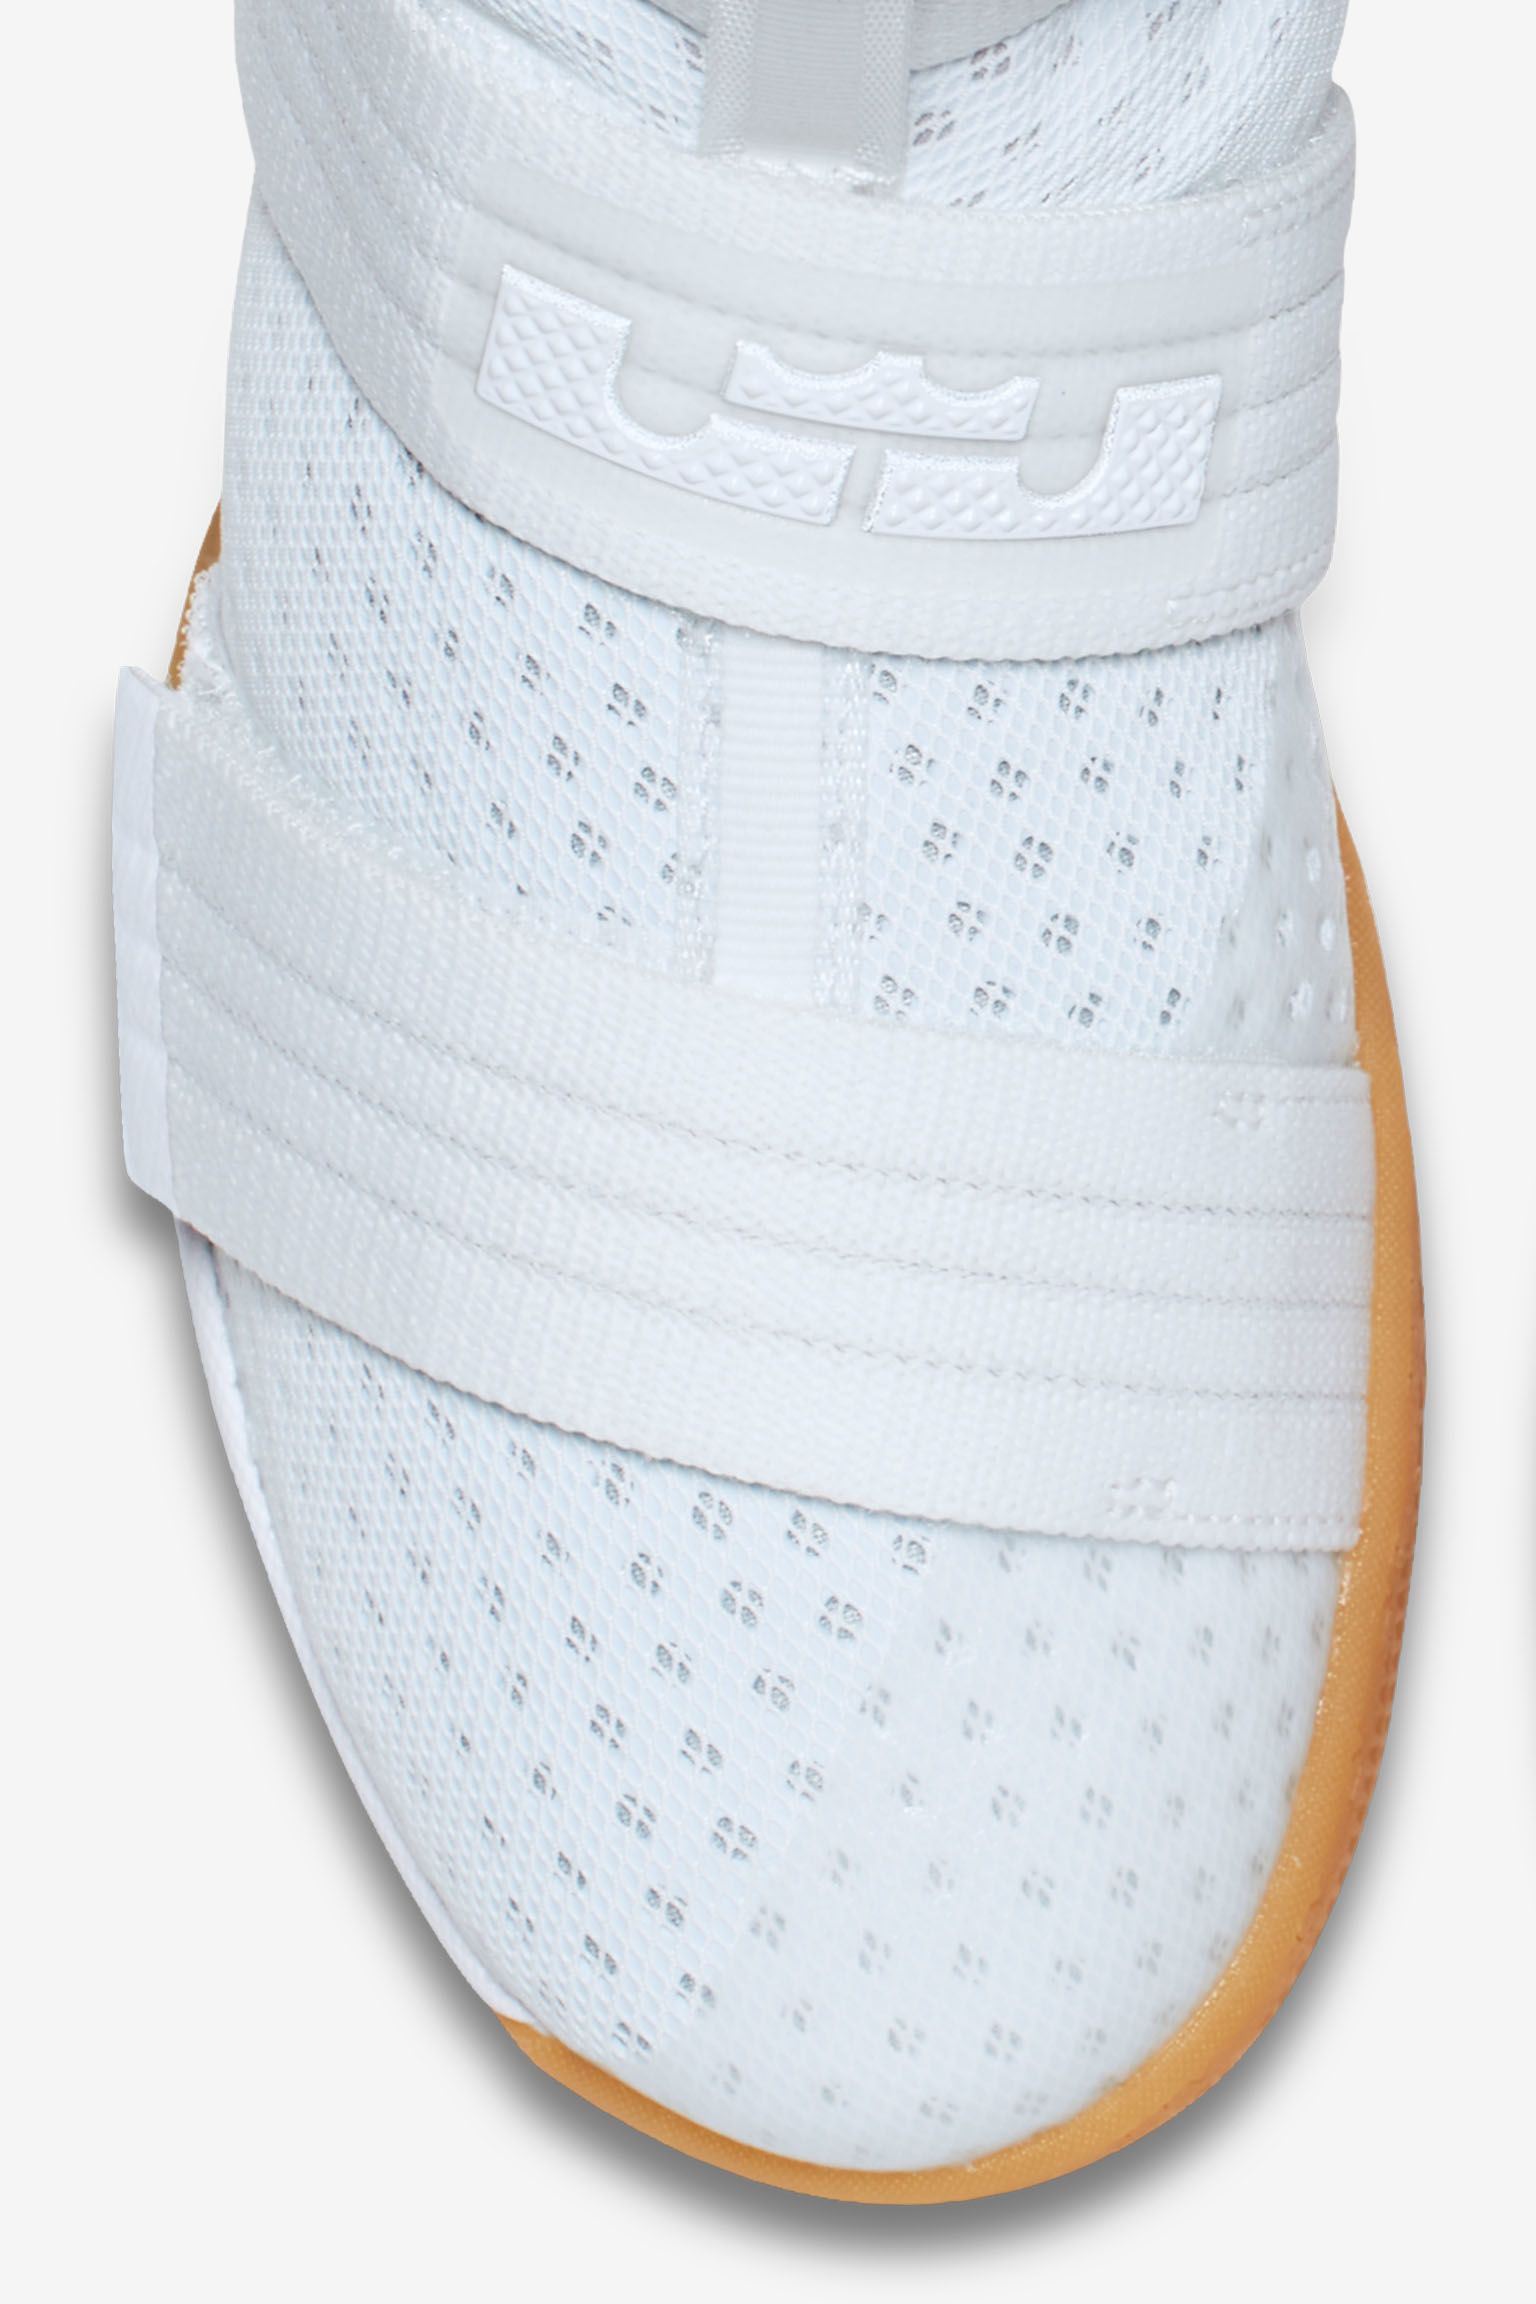 lebron soldier 10 all white